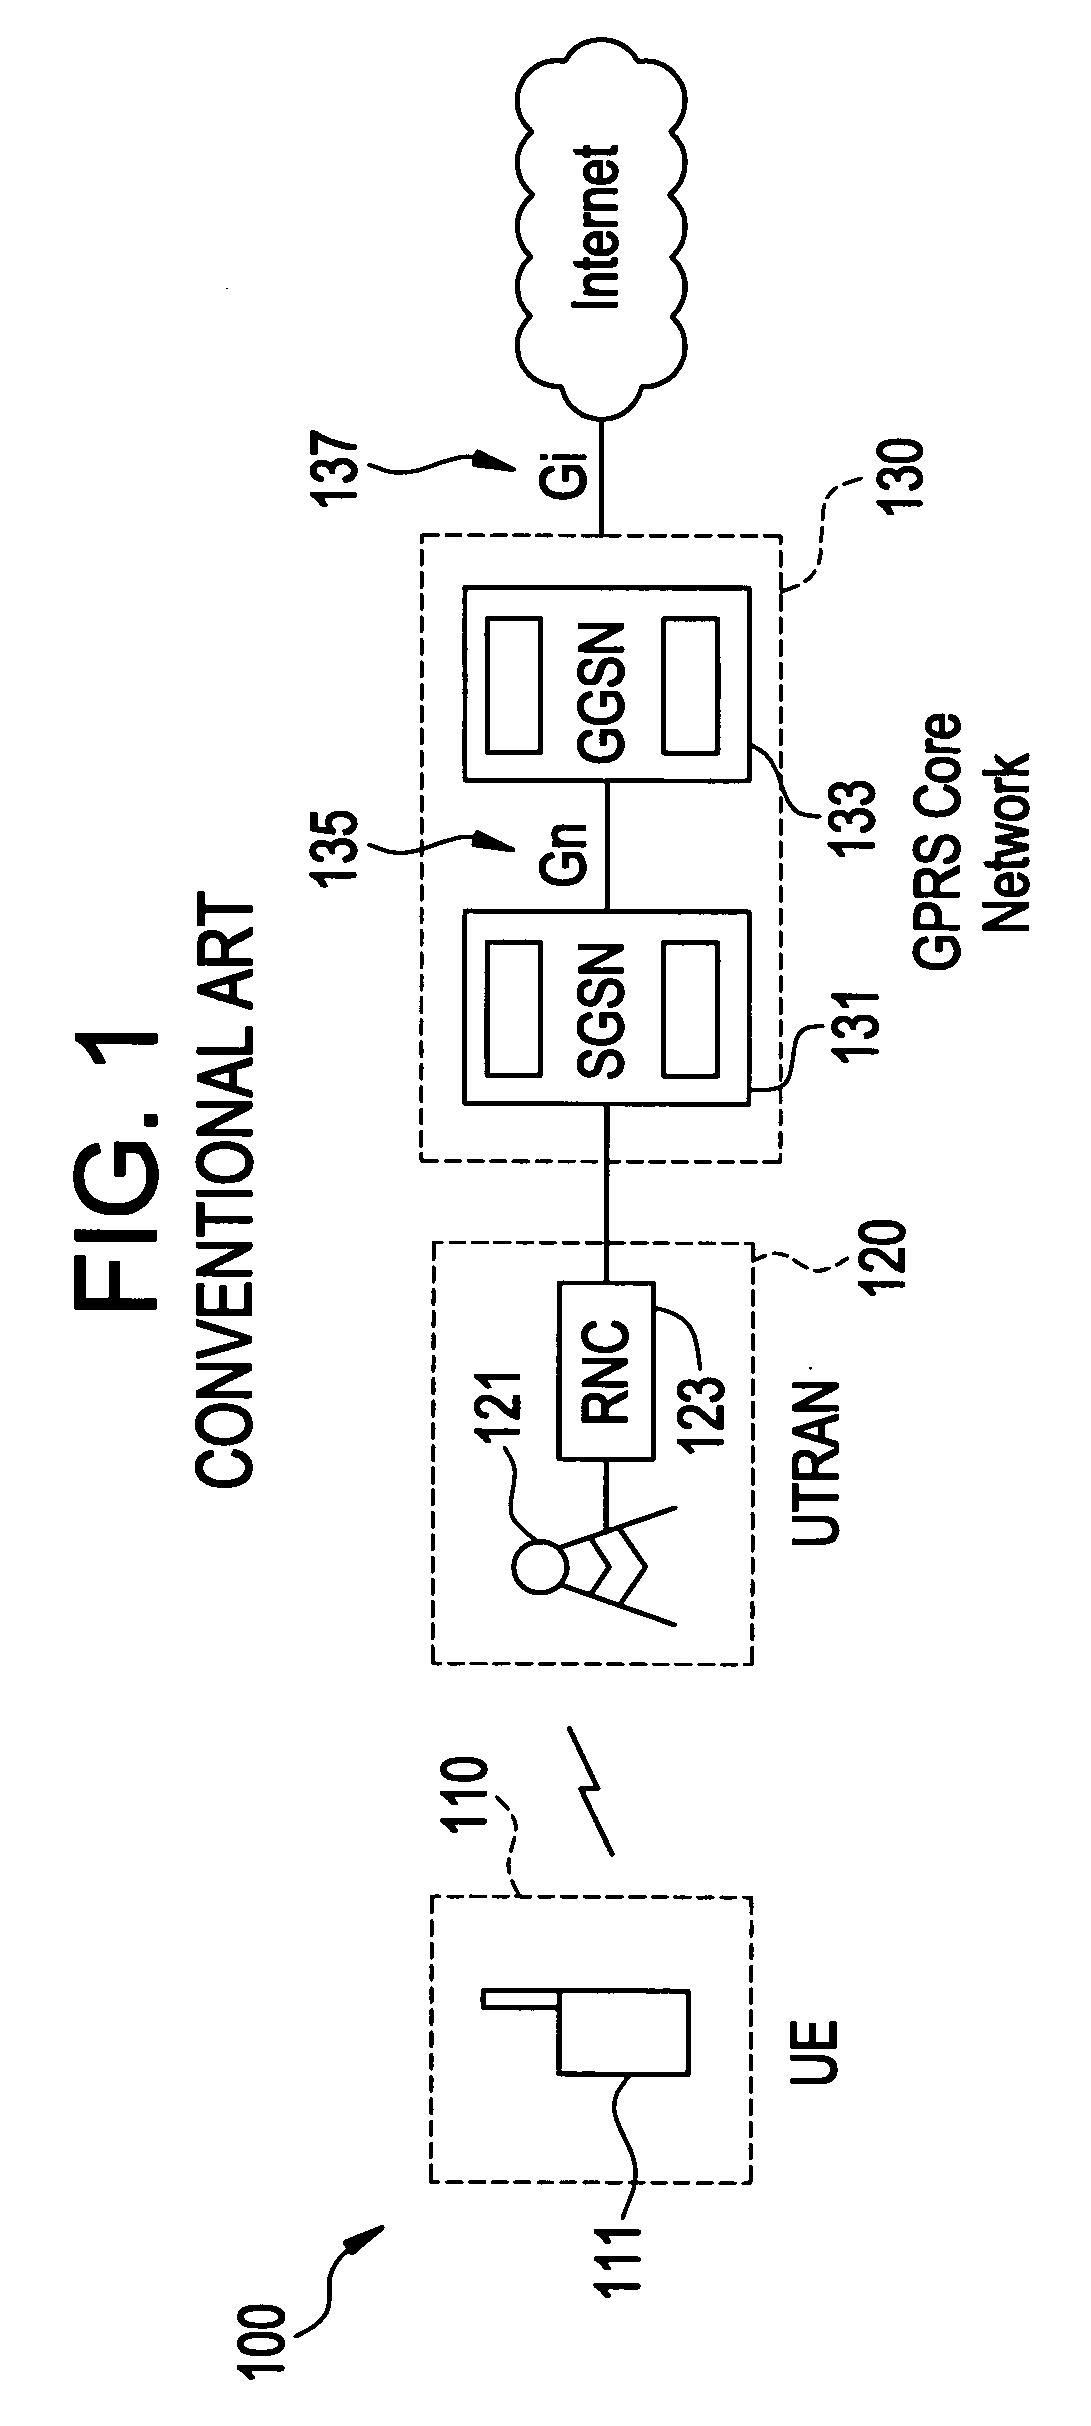 Method and system for correlating IP layer traffic and wirless layer elements in a UMTS/GSM network